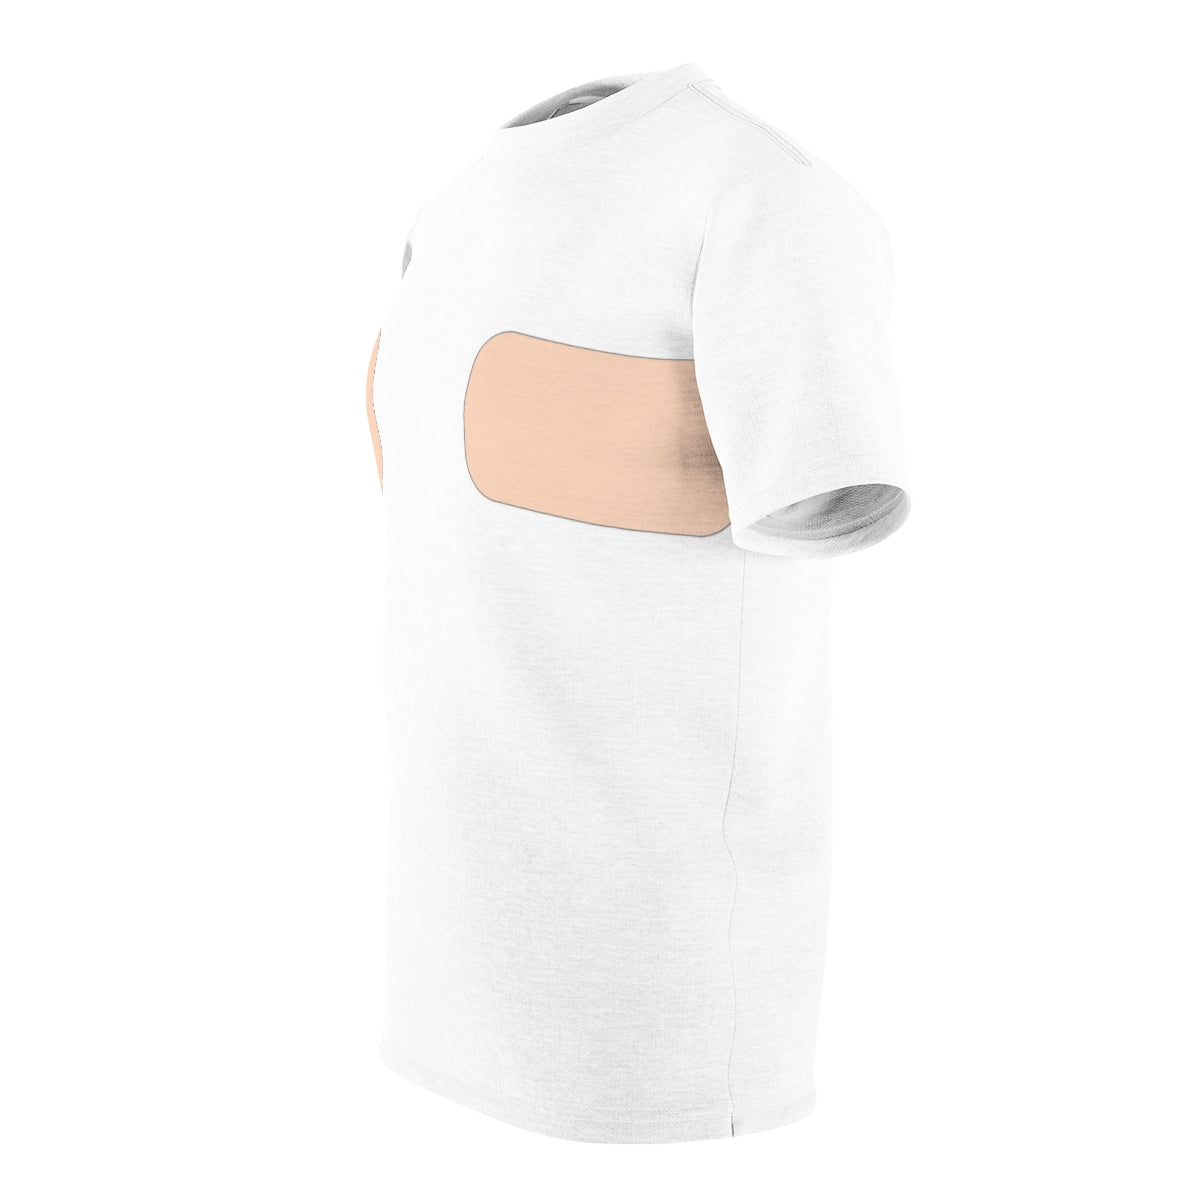 Normalize Chest Taping Tee | Skin Tone 001 - 1 Strip